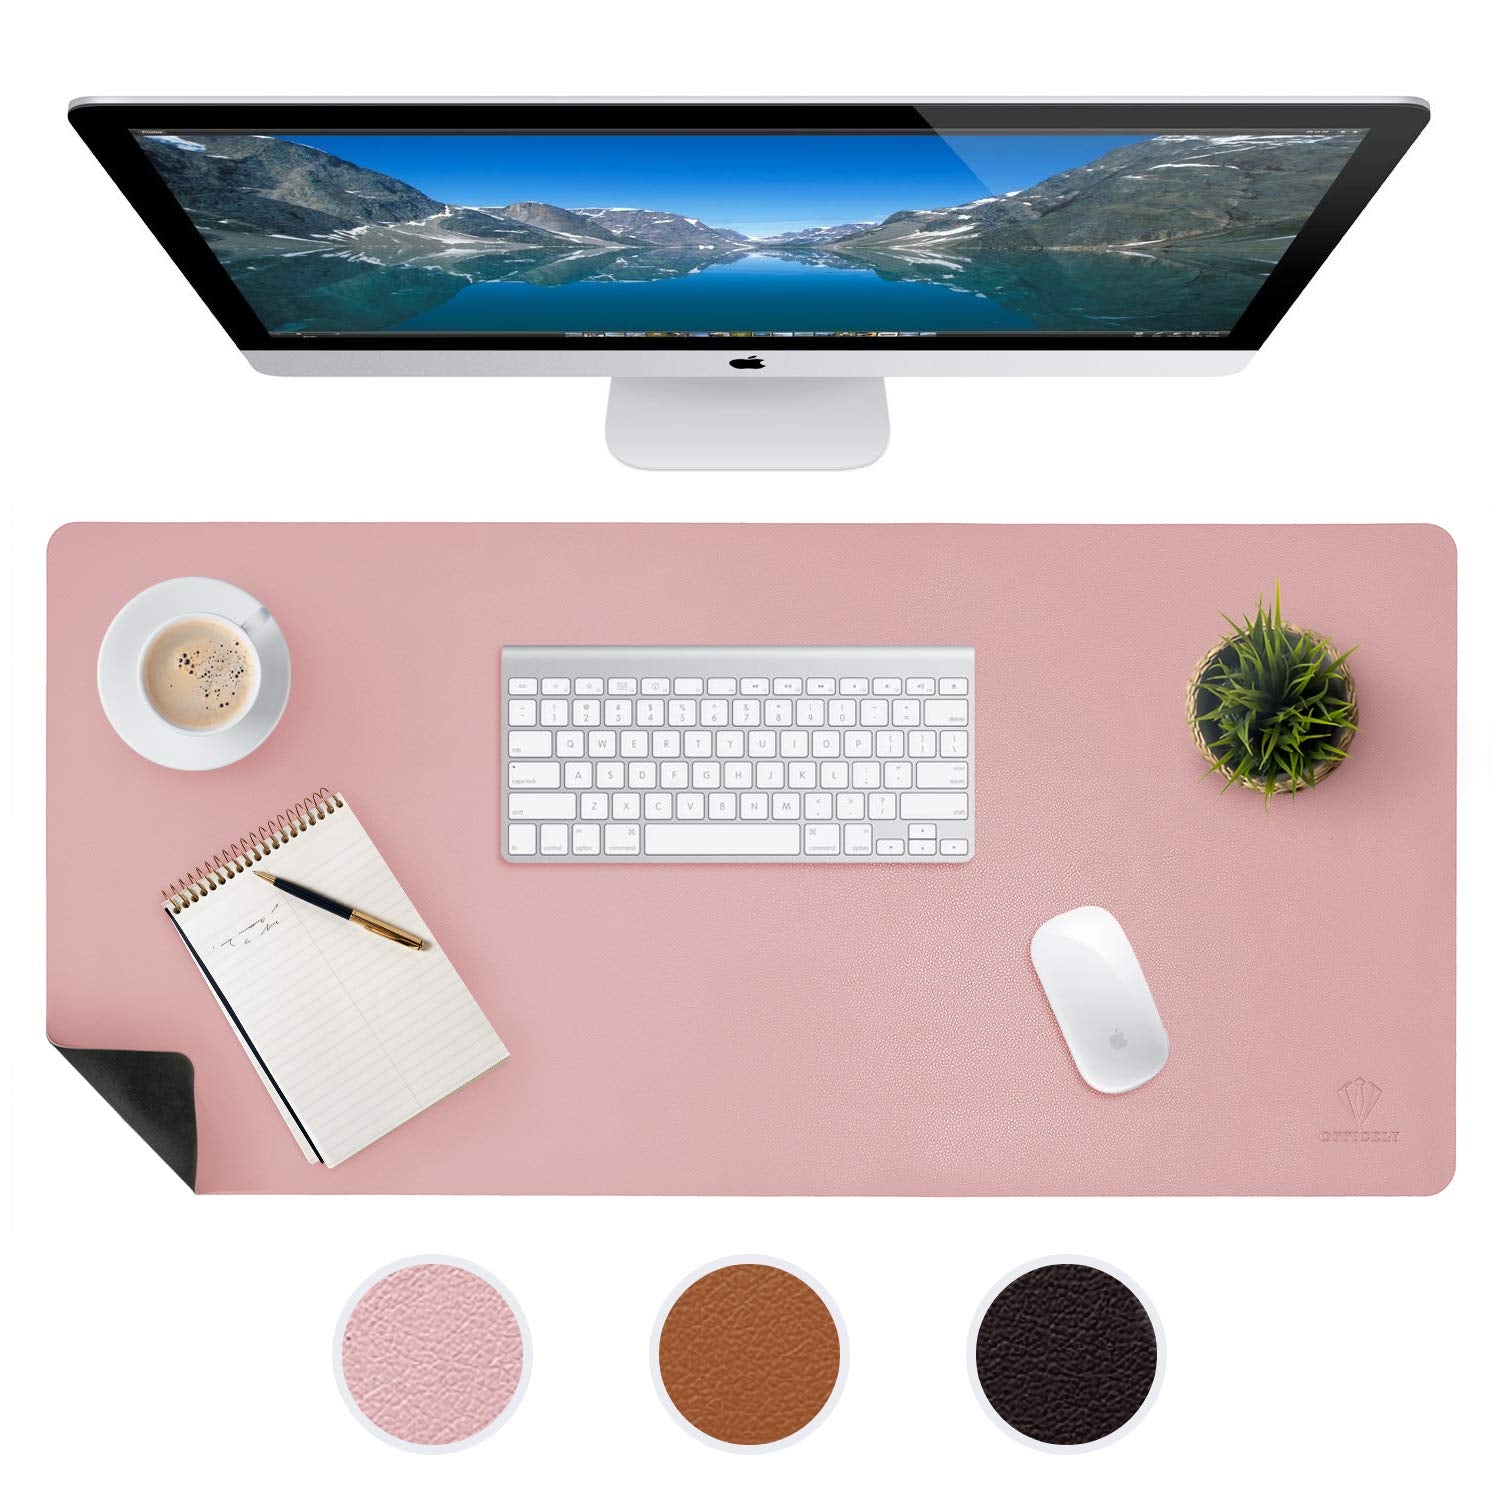 Large Leather Desk Mats for Keyboard and Mouse Pad, Anti-Skid Backing with Heat Resistant and Waterproof Surface, Responsive Desktop for Gaming, Writing, or Home Office Work (Pink, 24X48)  - Very Good